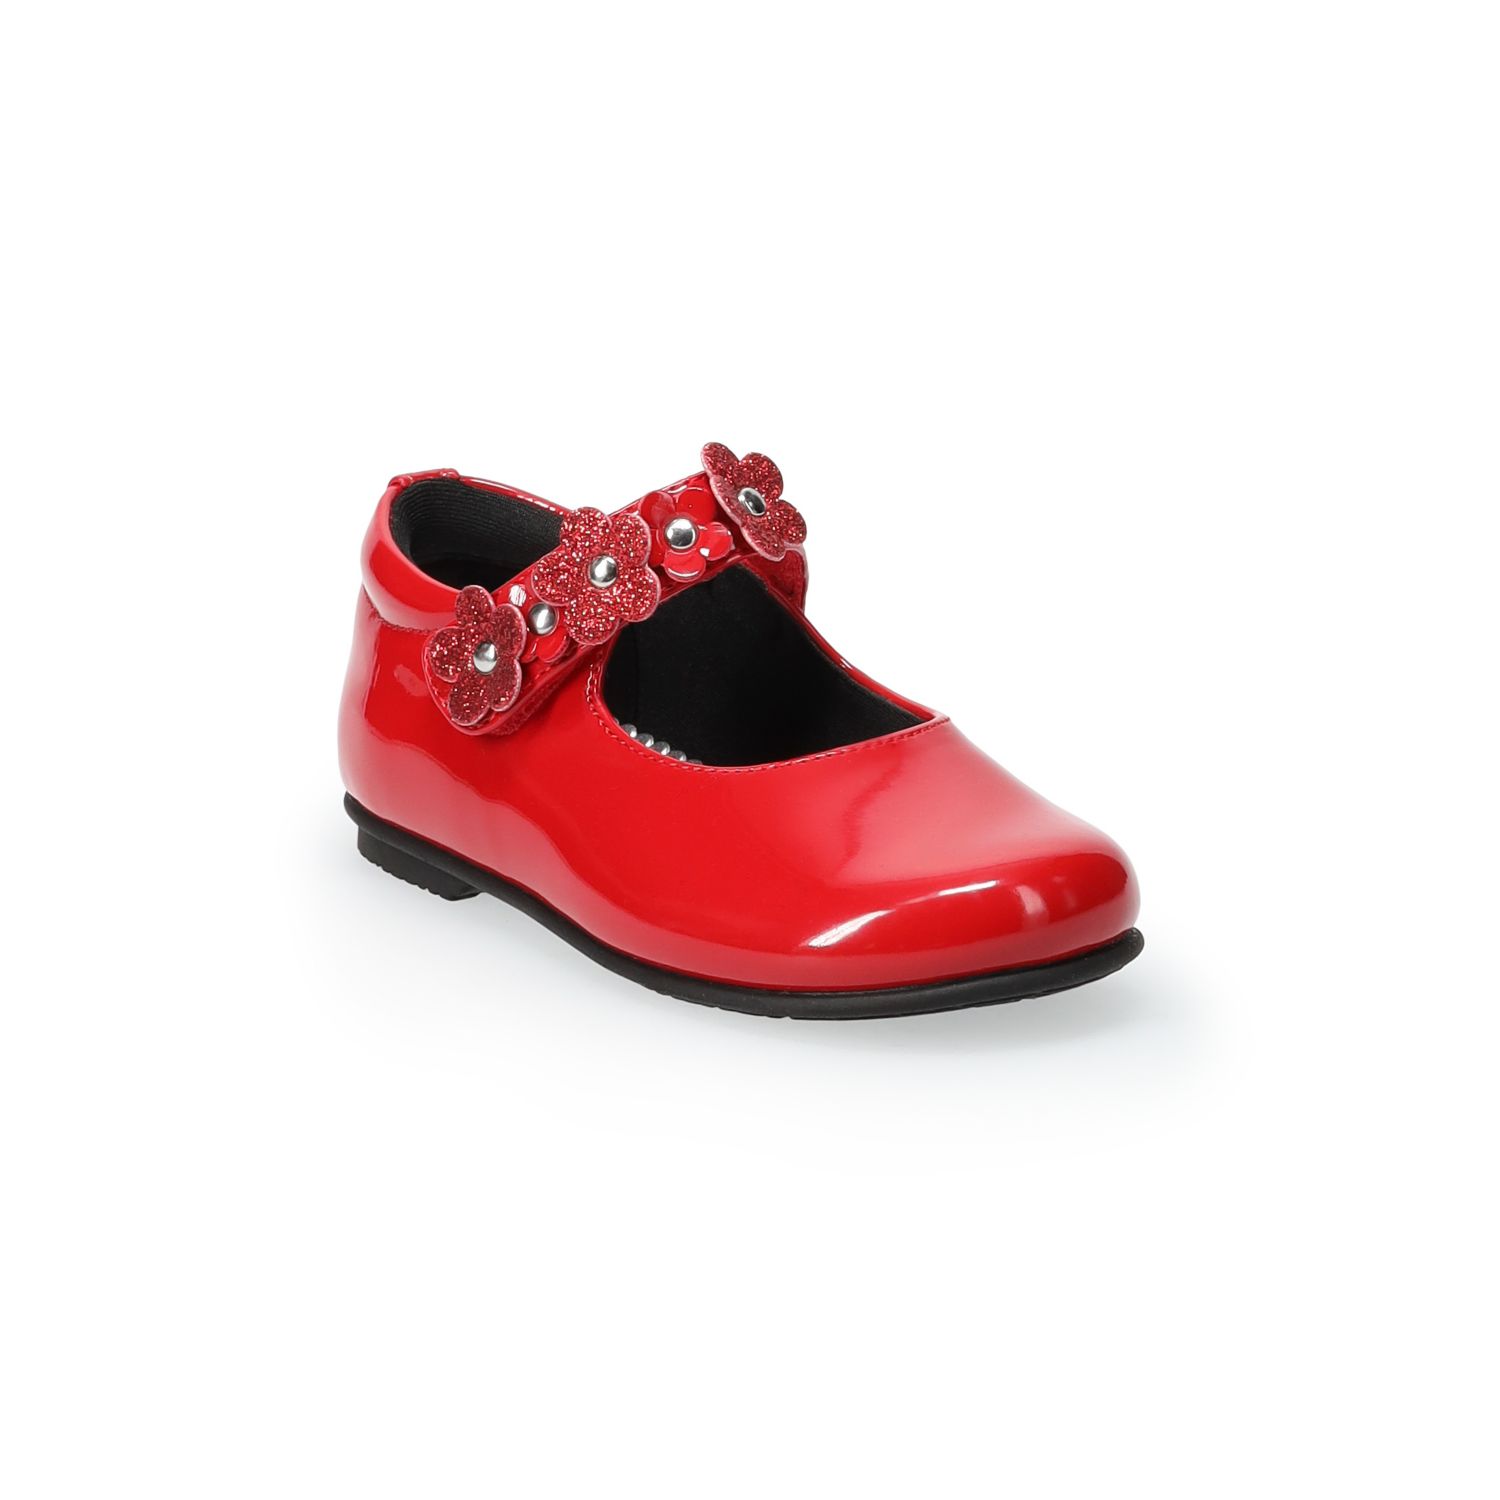 Girls Red Dress Shoes | Kohl's